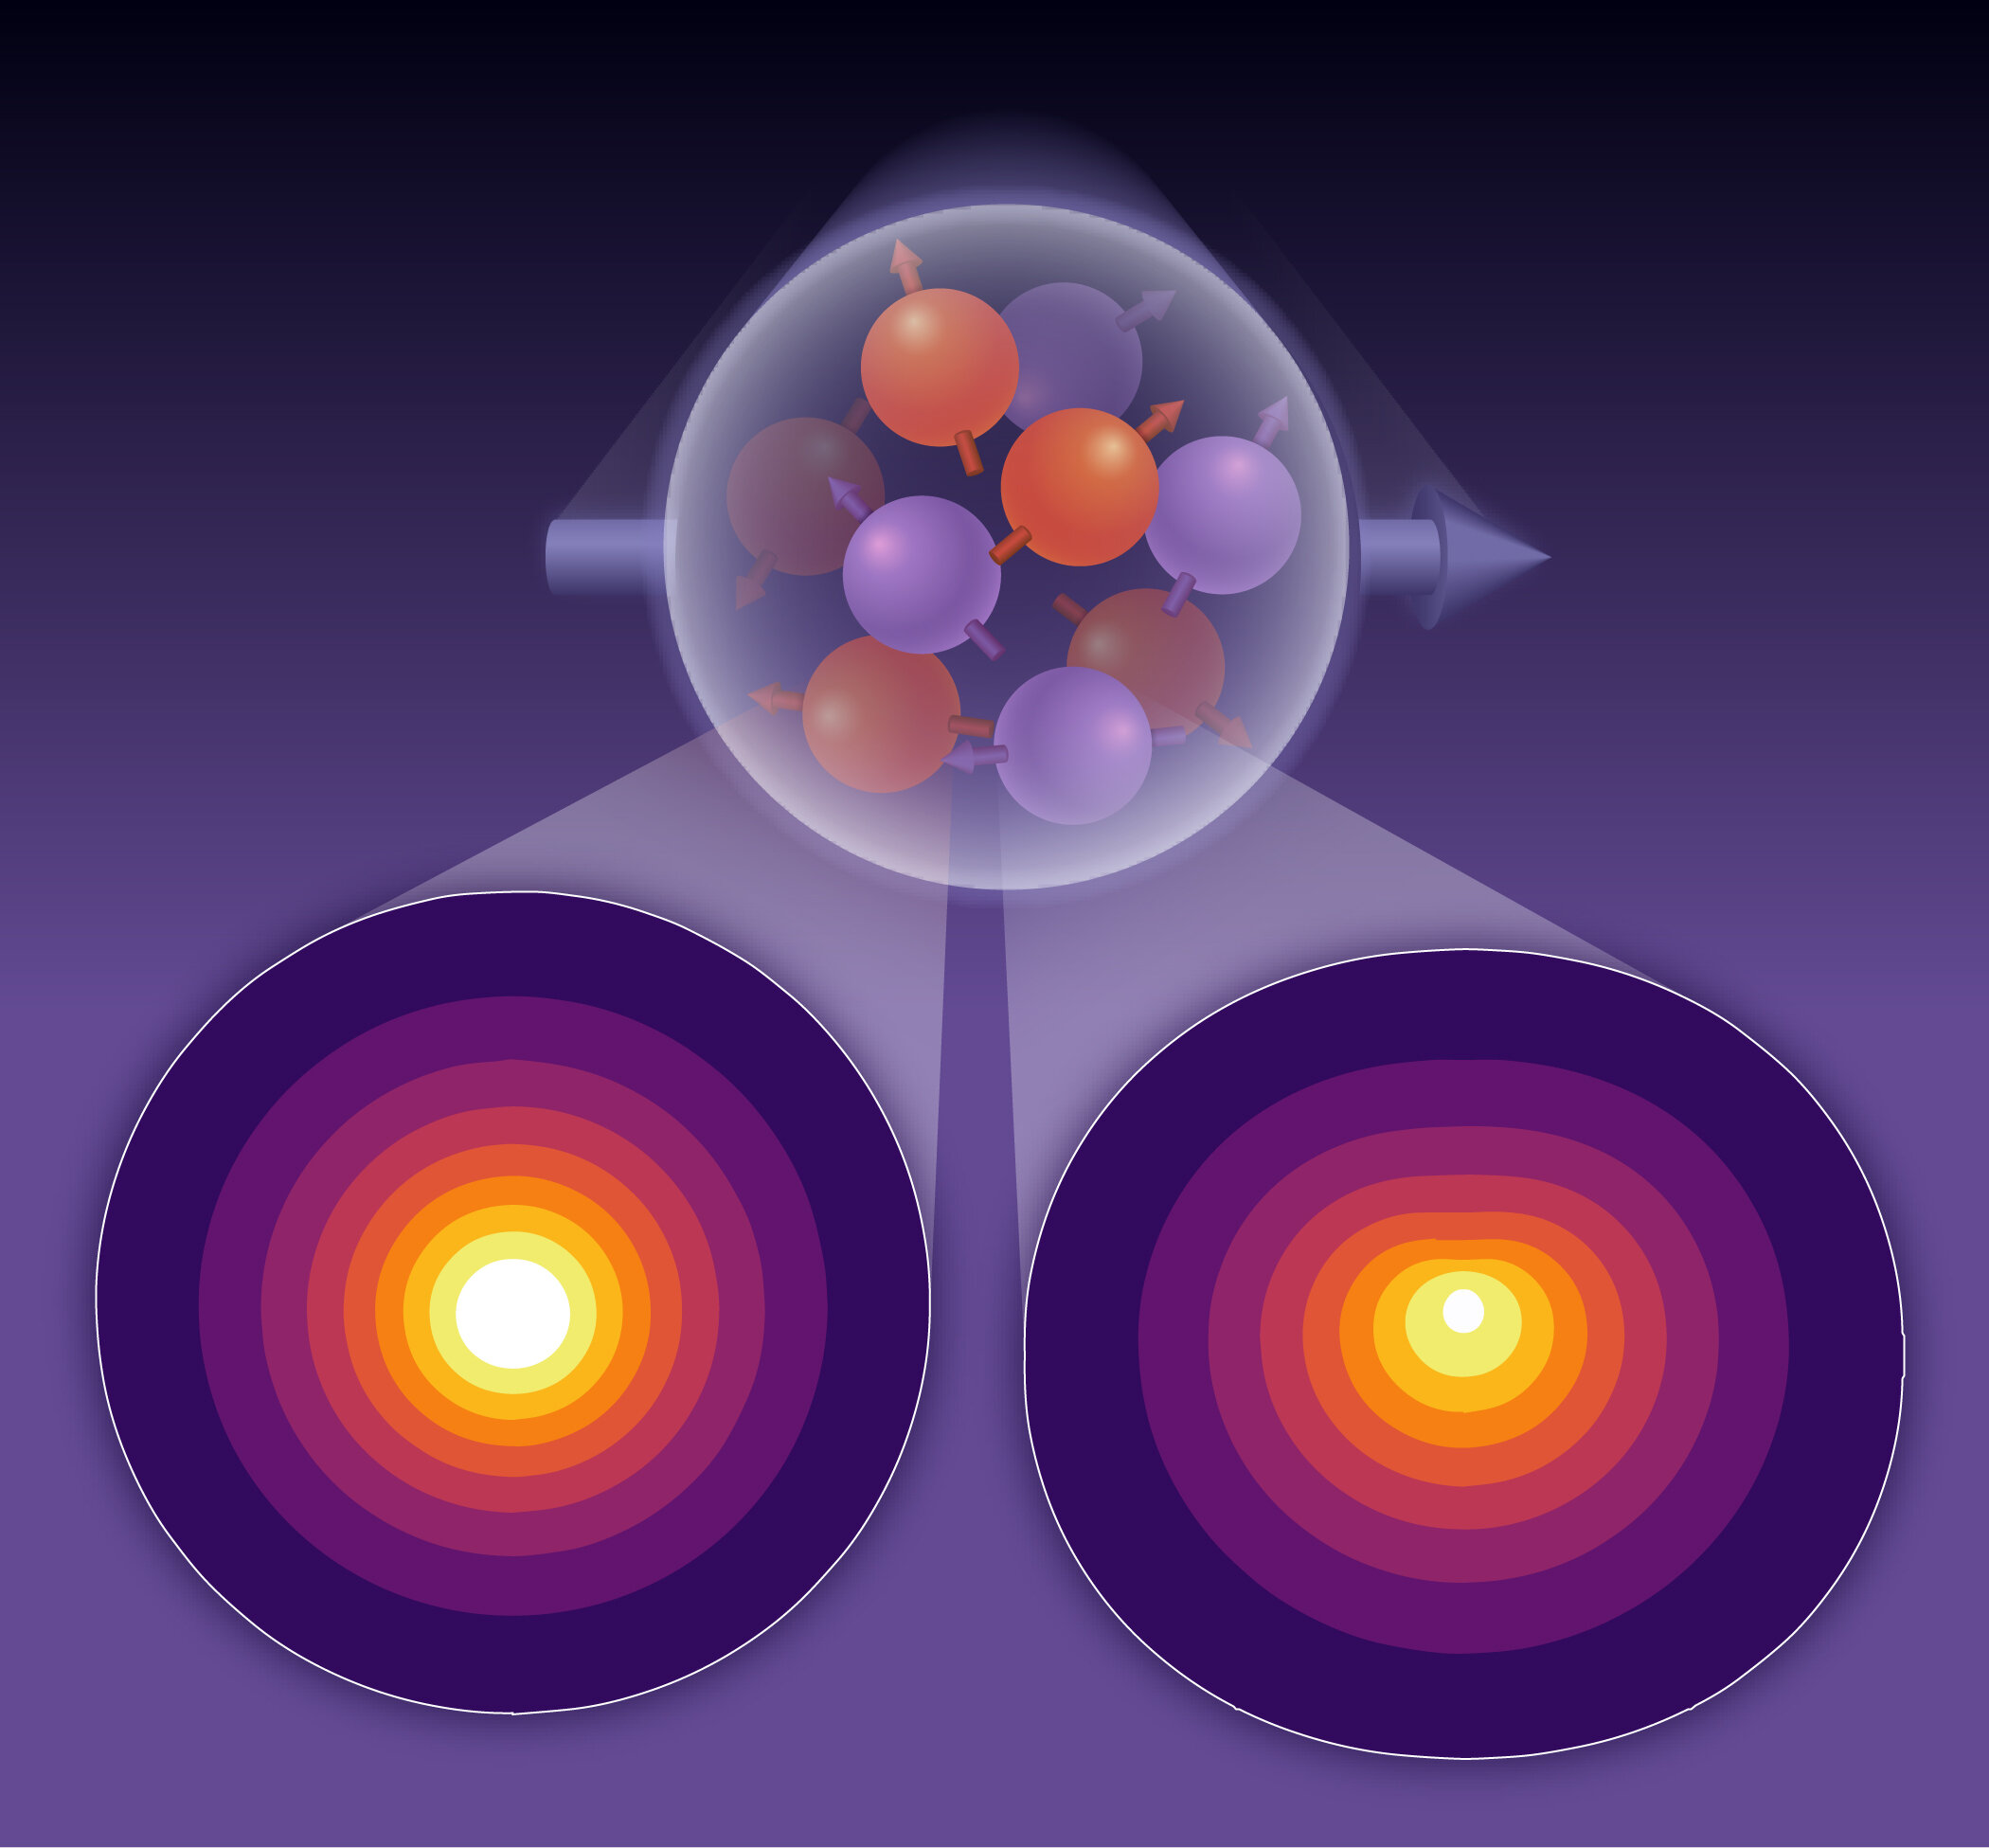 Calculations reveal high-resolution view of quarks inside protons